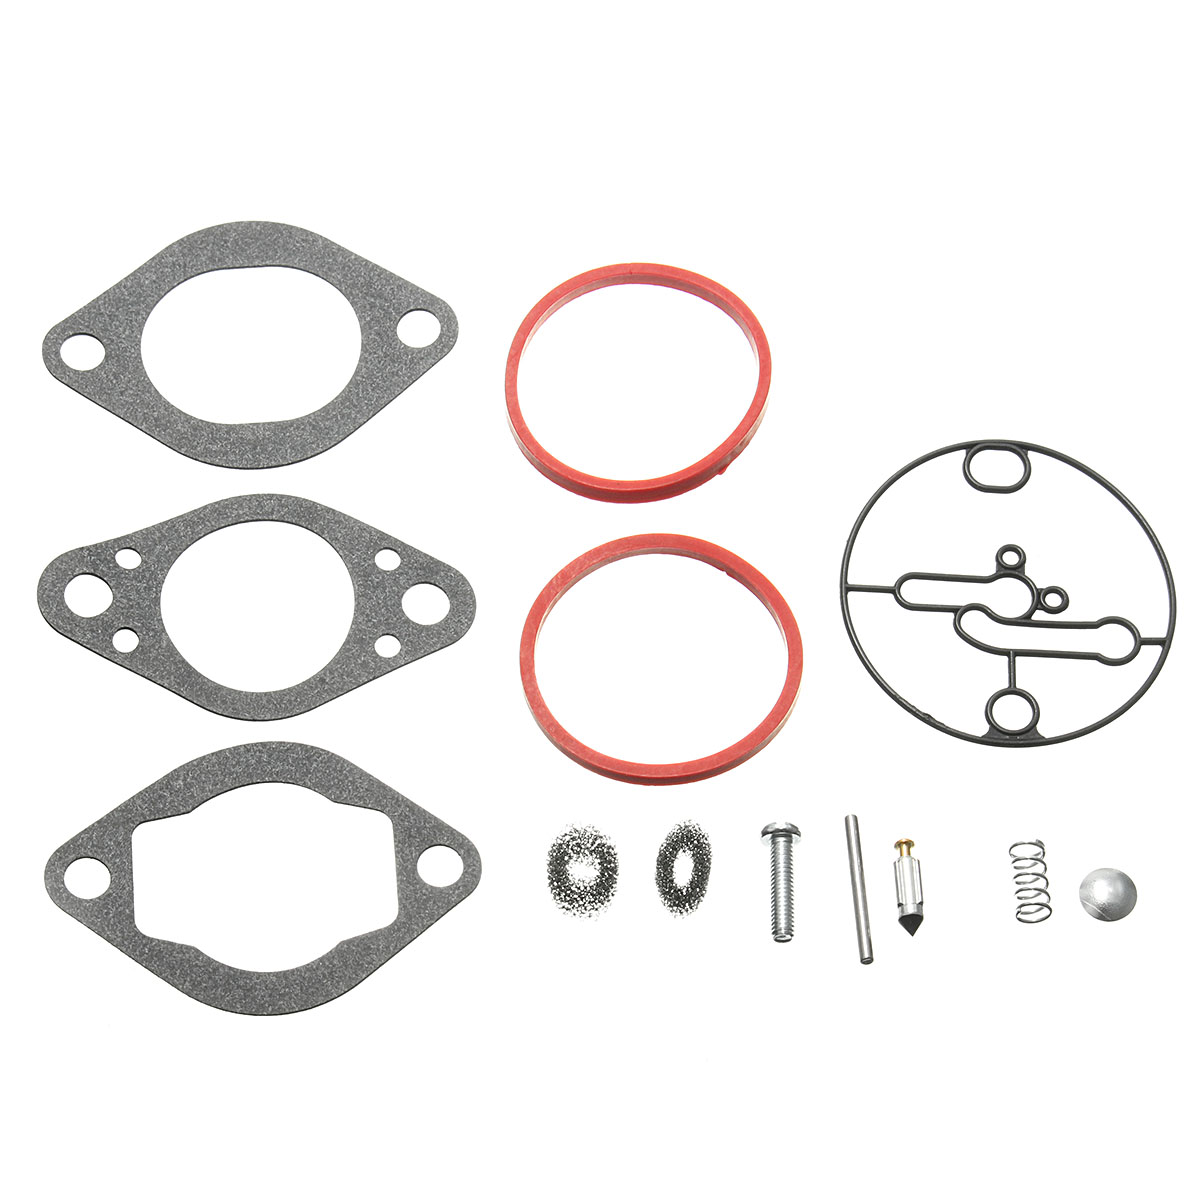 

Carburetor Carb Gasket Overhaul Kit For Briggs Stratton Replaces # 696146 696147